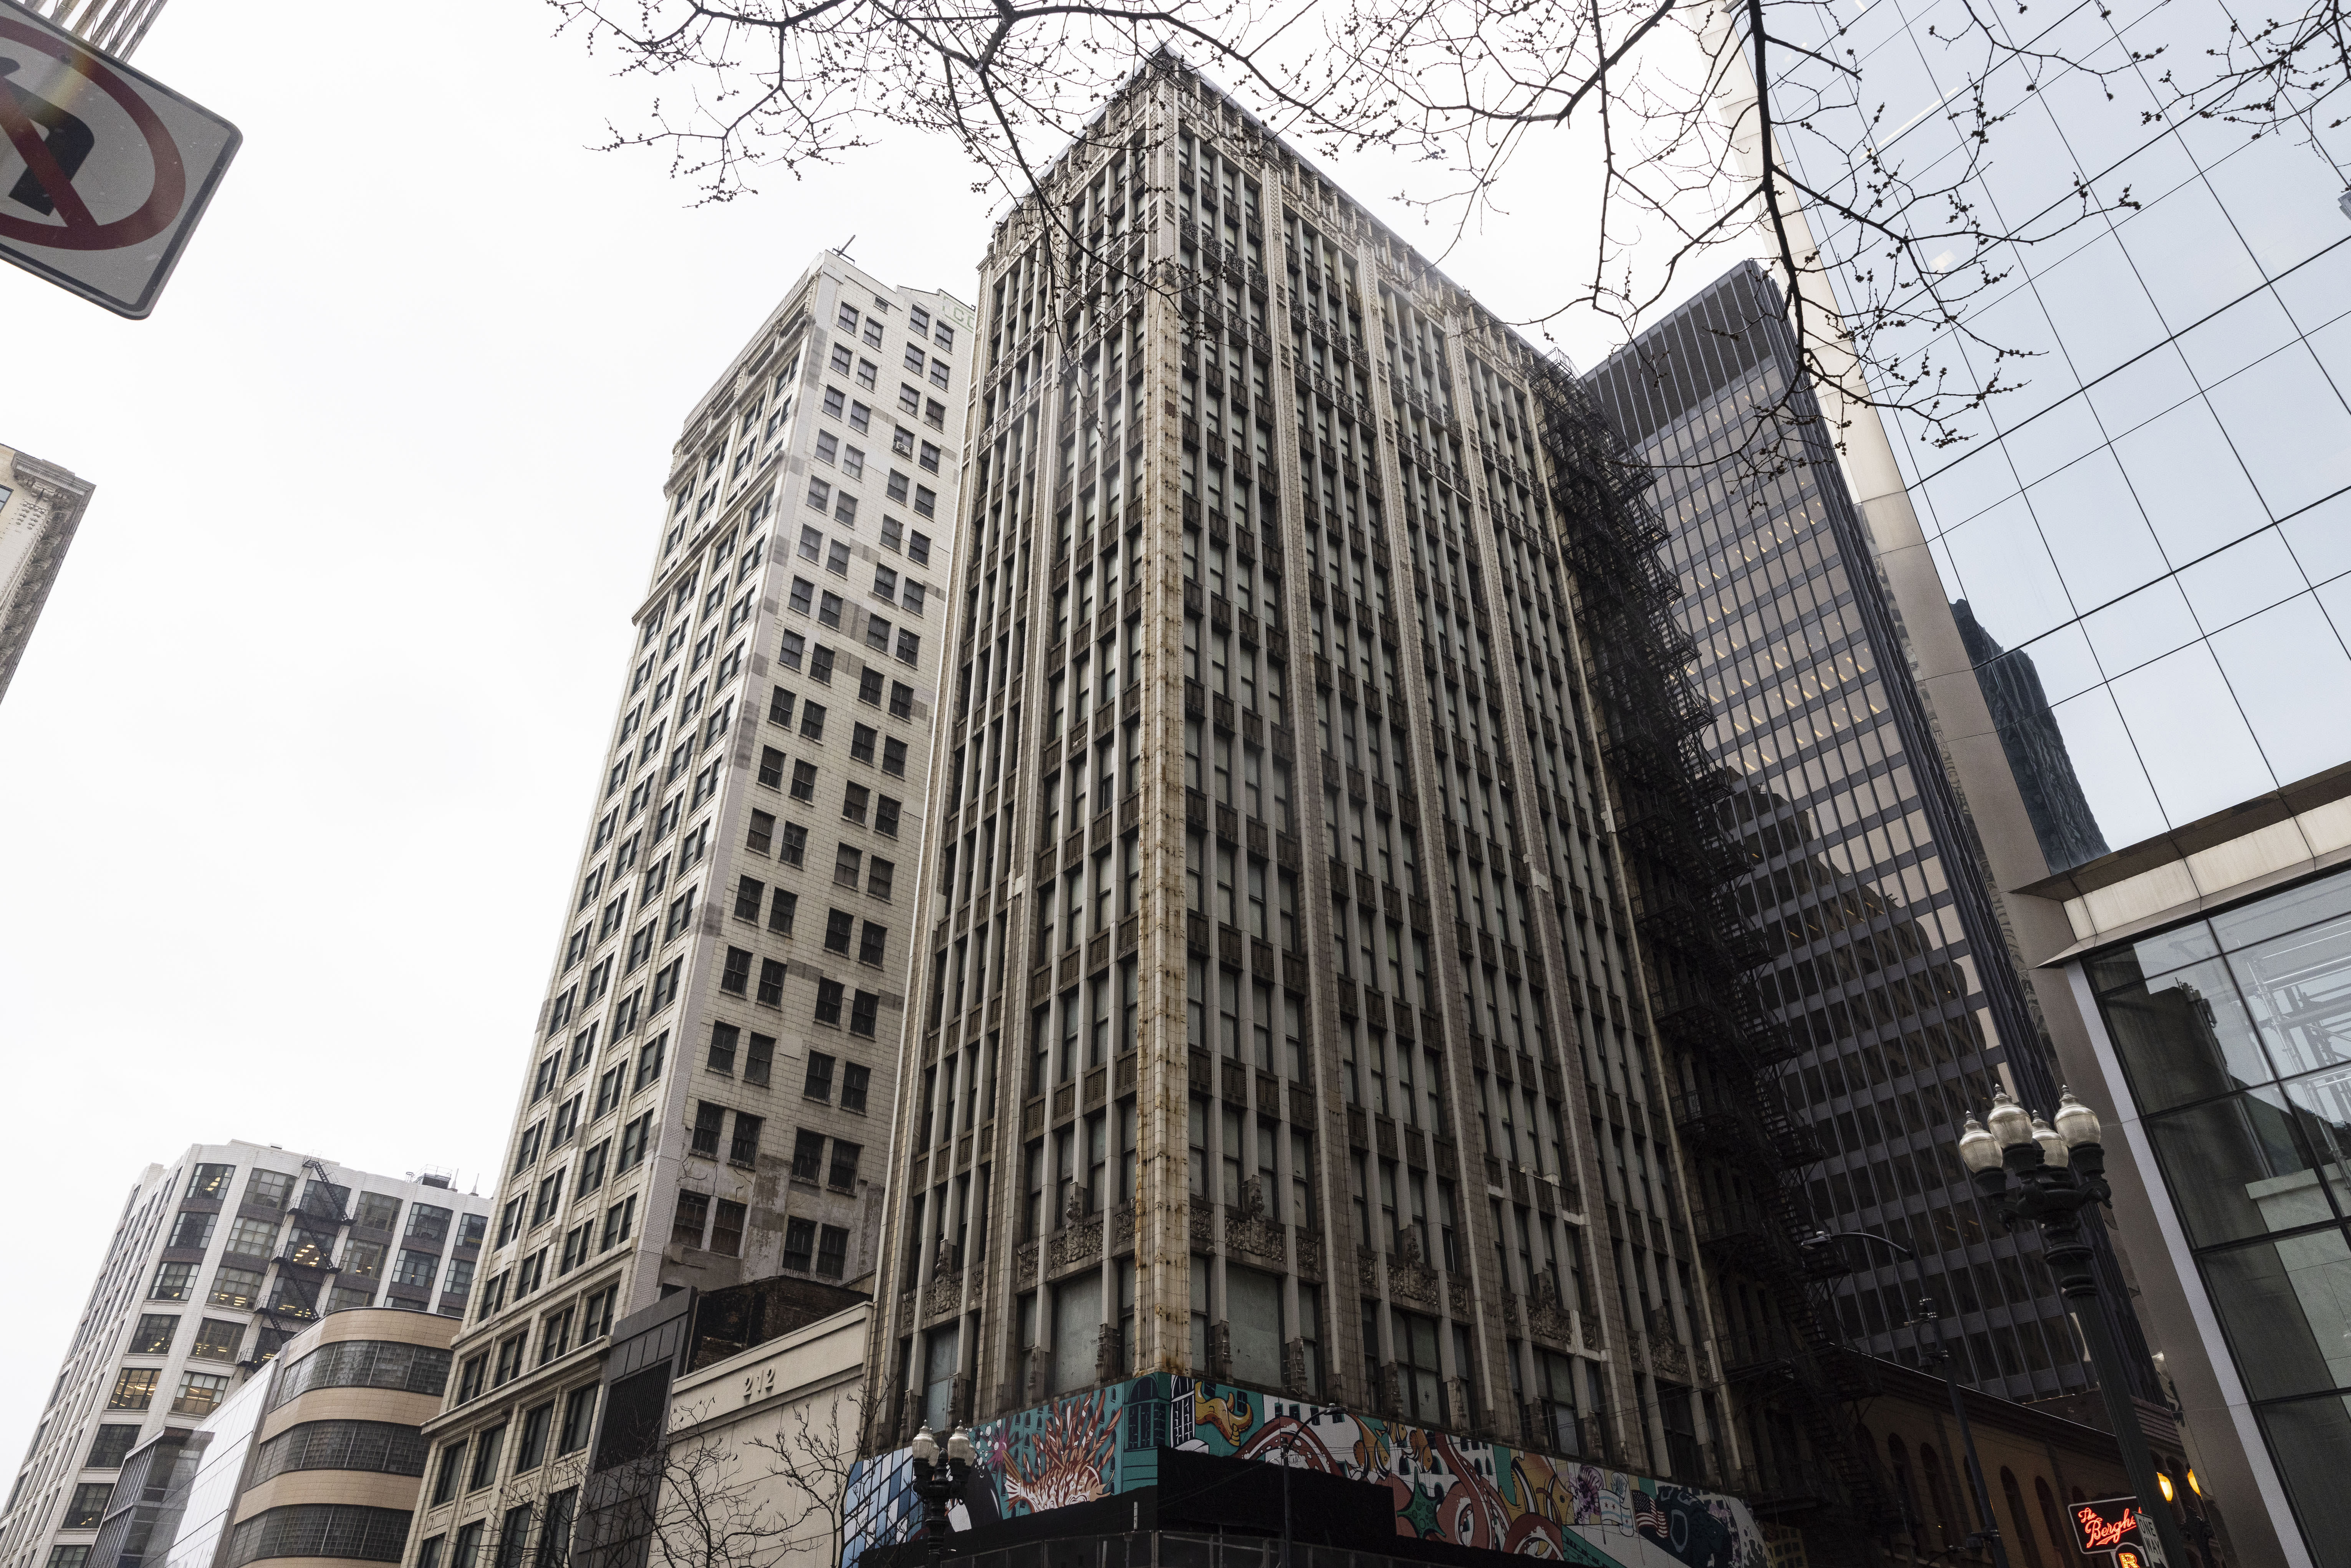 Century-old Loop skyscrapers to be preserved, federal agency decides